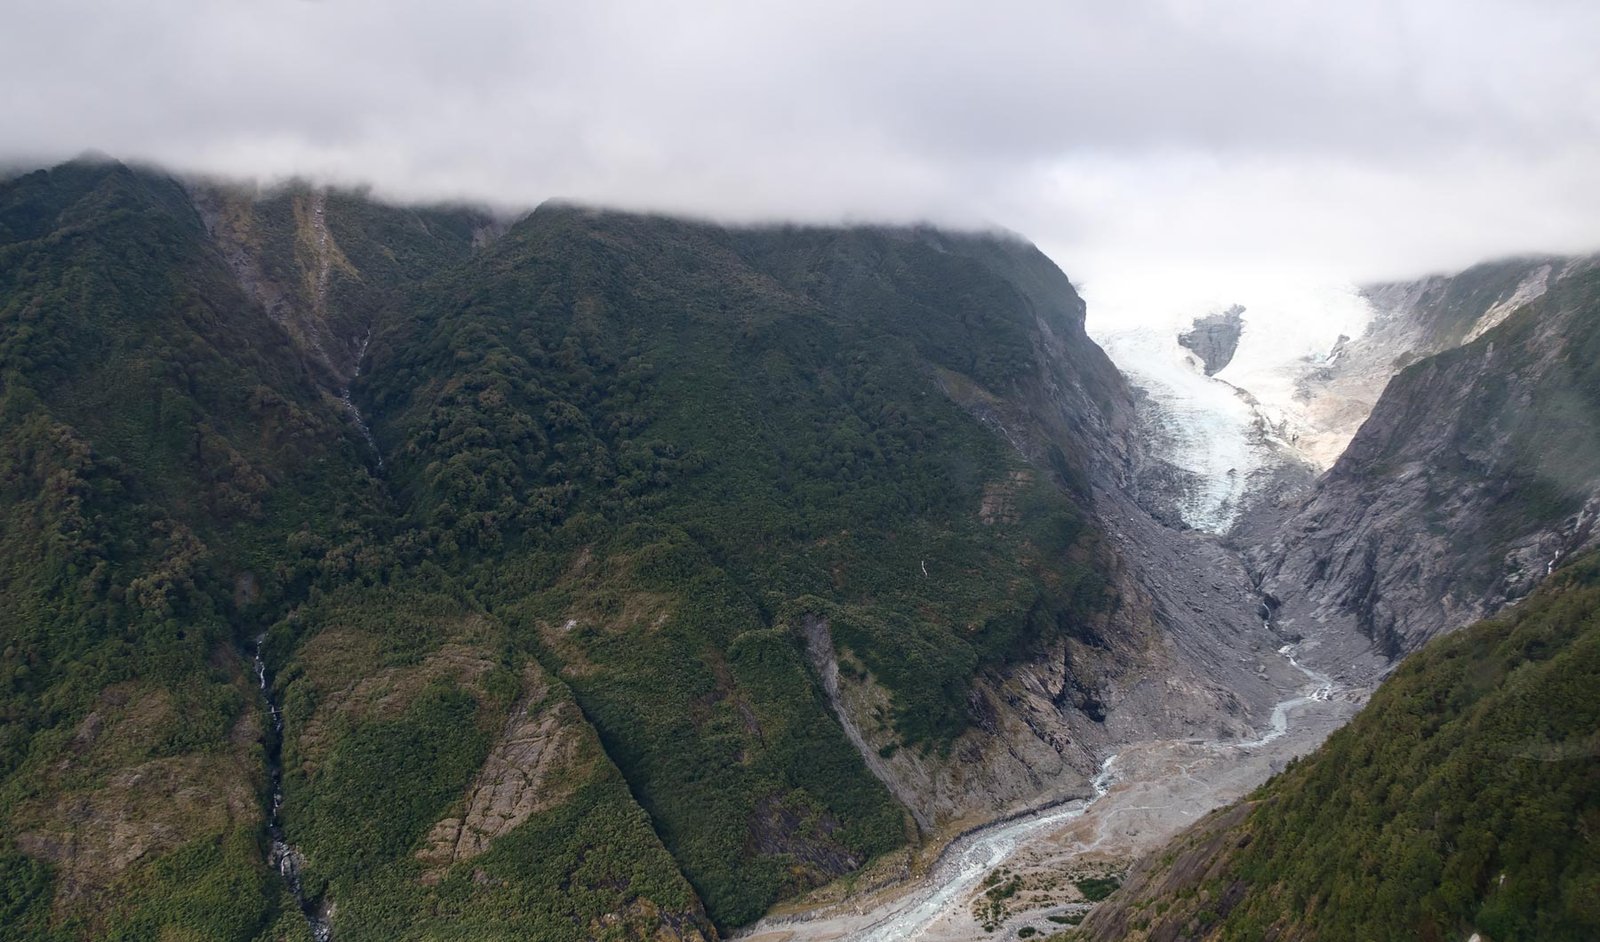 Franz Josef Glacier Helicopter Hike: an Icy Adventure in New Zealand - One of the best things to do on the South Island